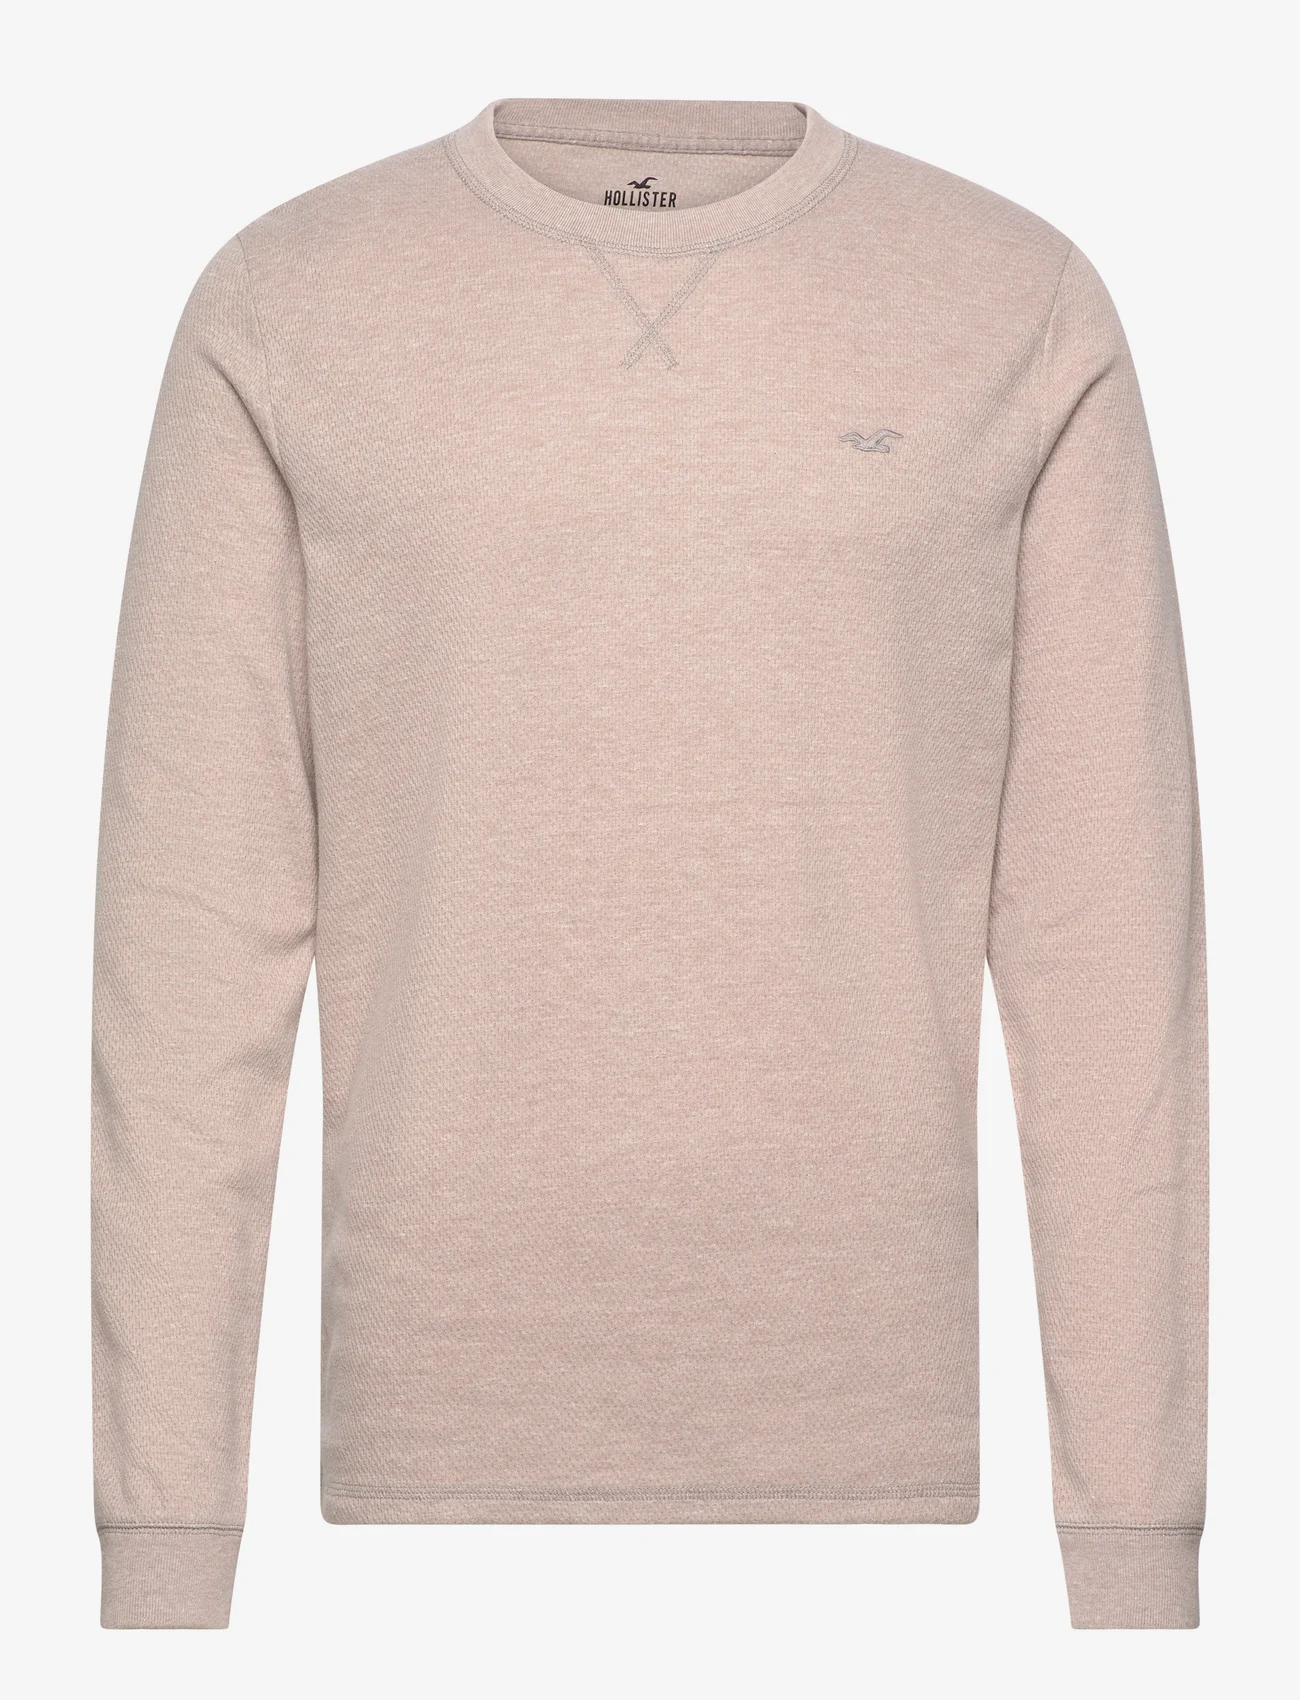 Hollister - HCo. GUYS KNITS - lowest prices - texture tan - 0